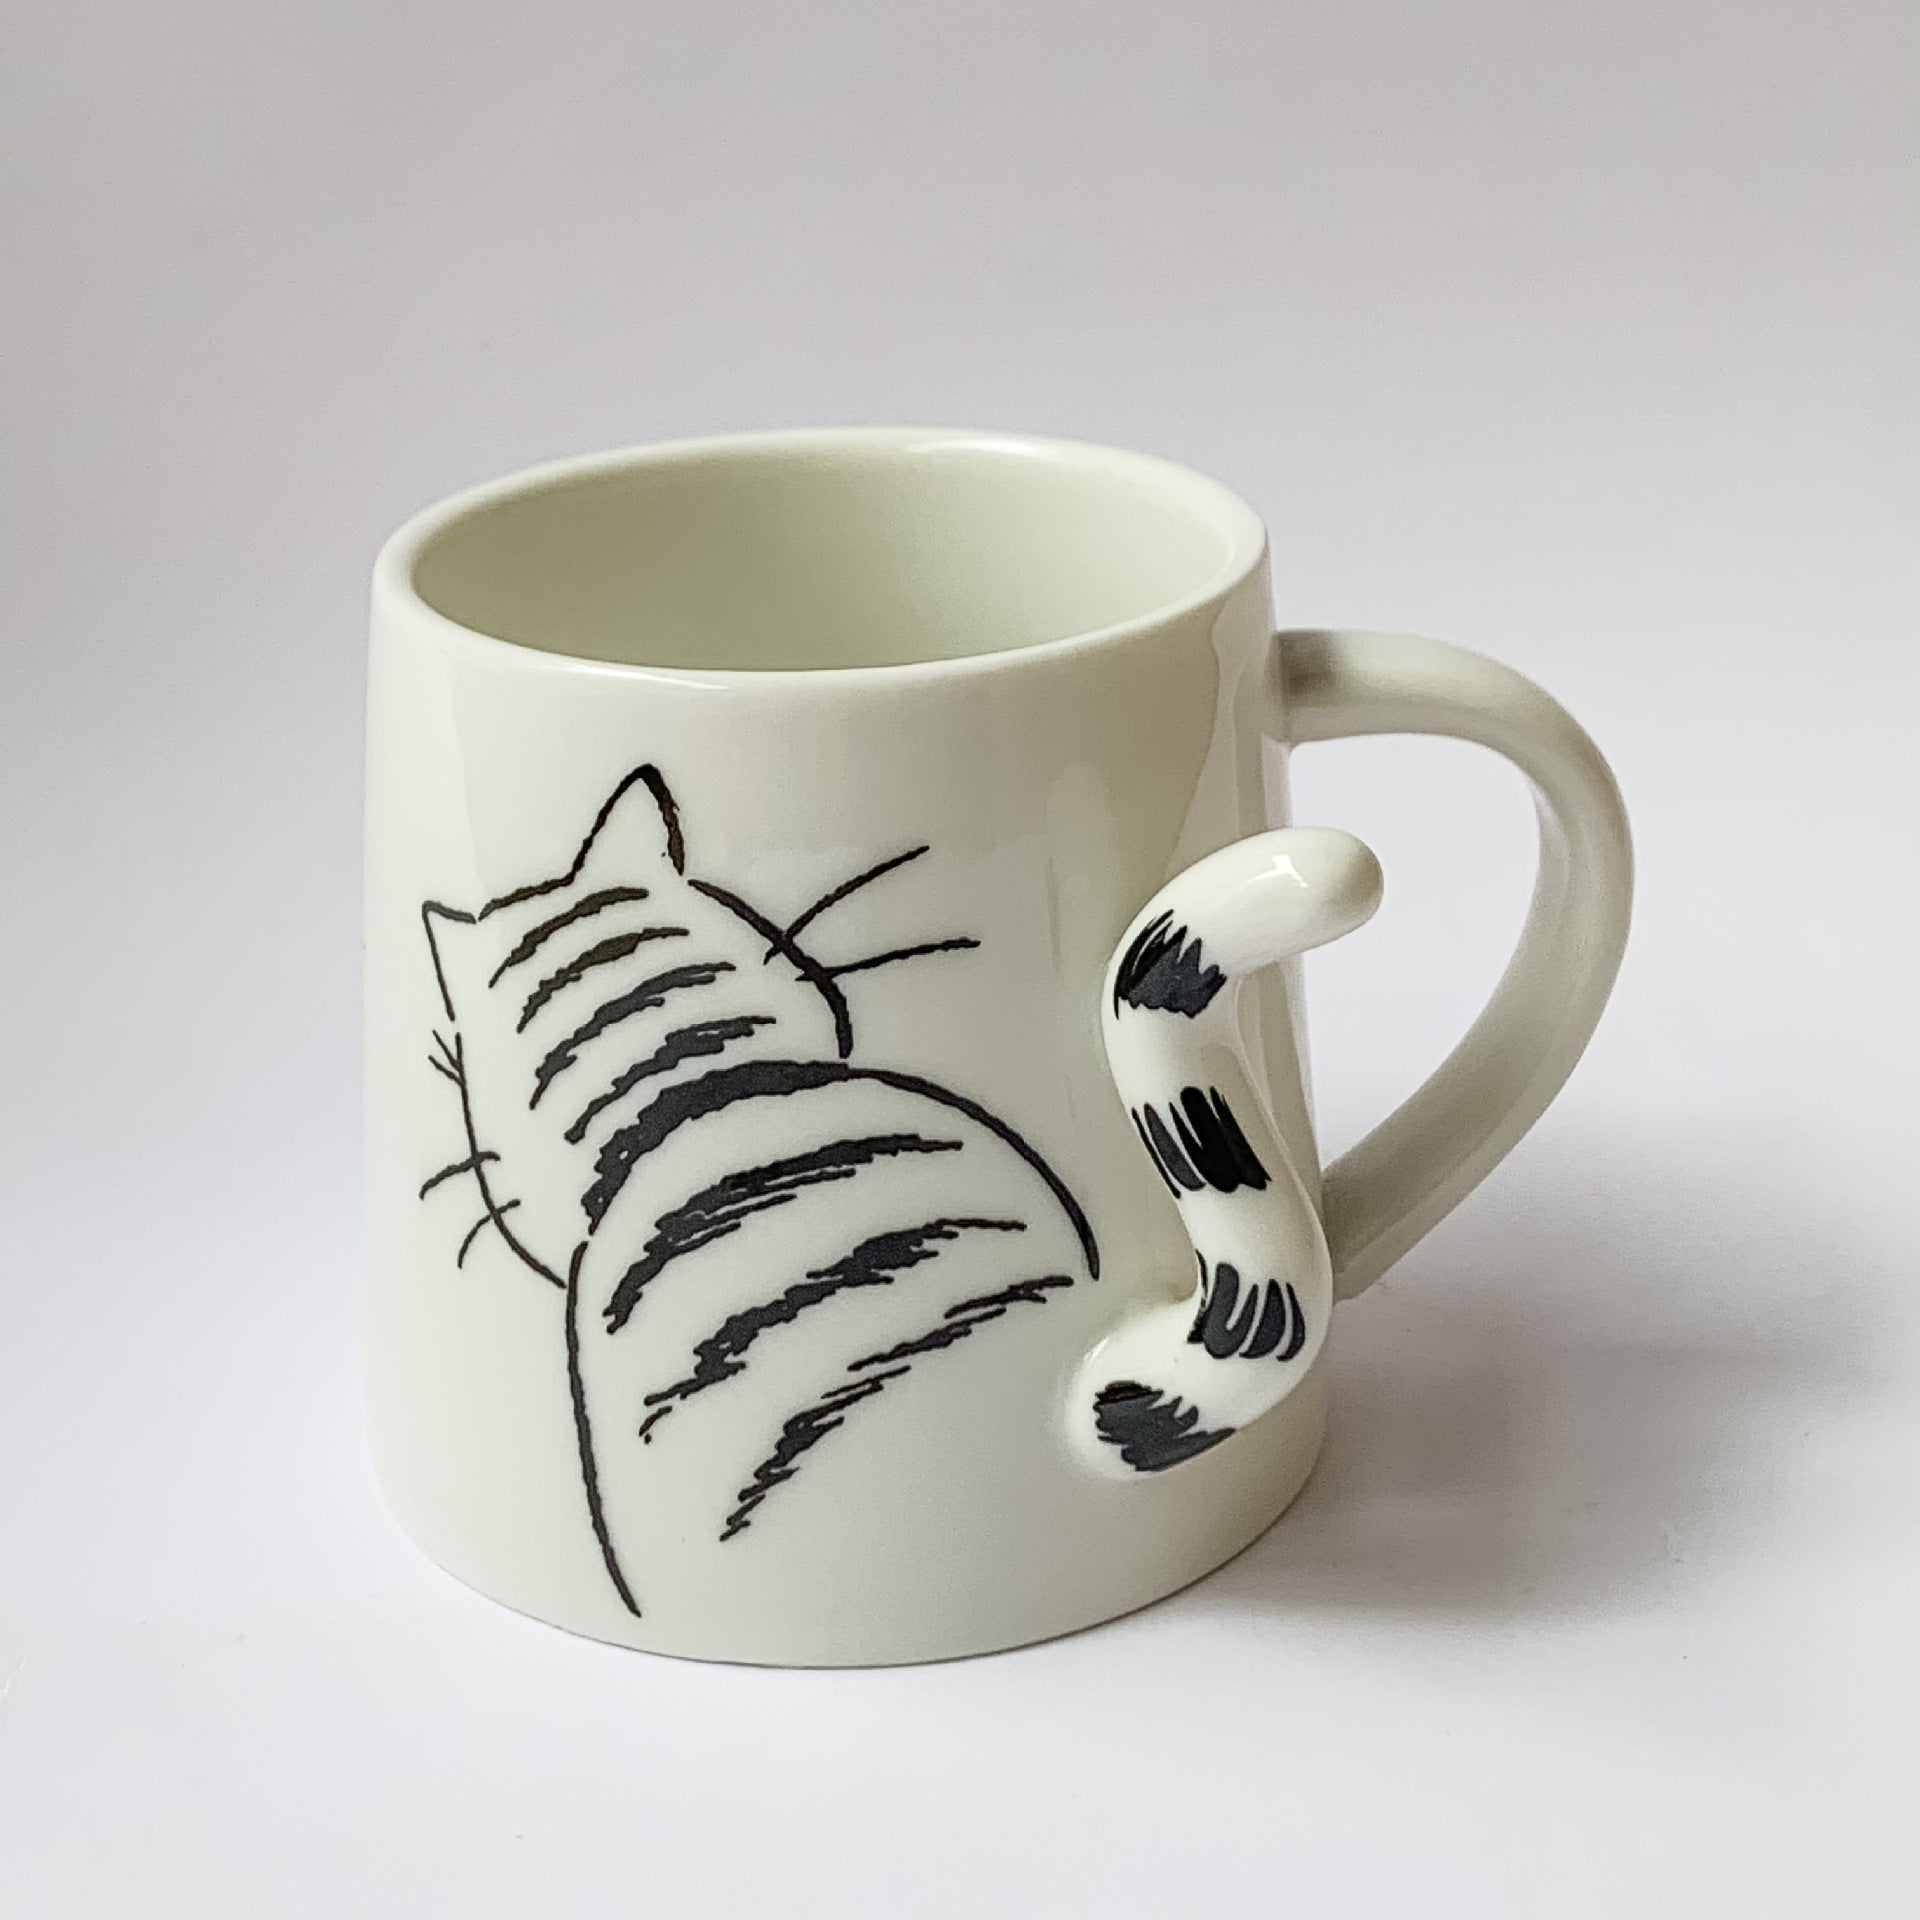 Animal Tail Coffee CupThese cute Animal Tail Coffee Cup offers in chose of 2 styles: Dog/ Cat.